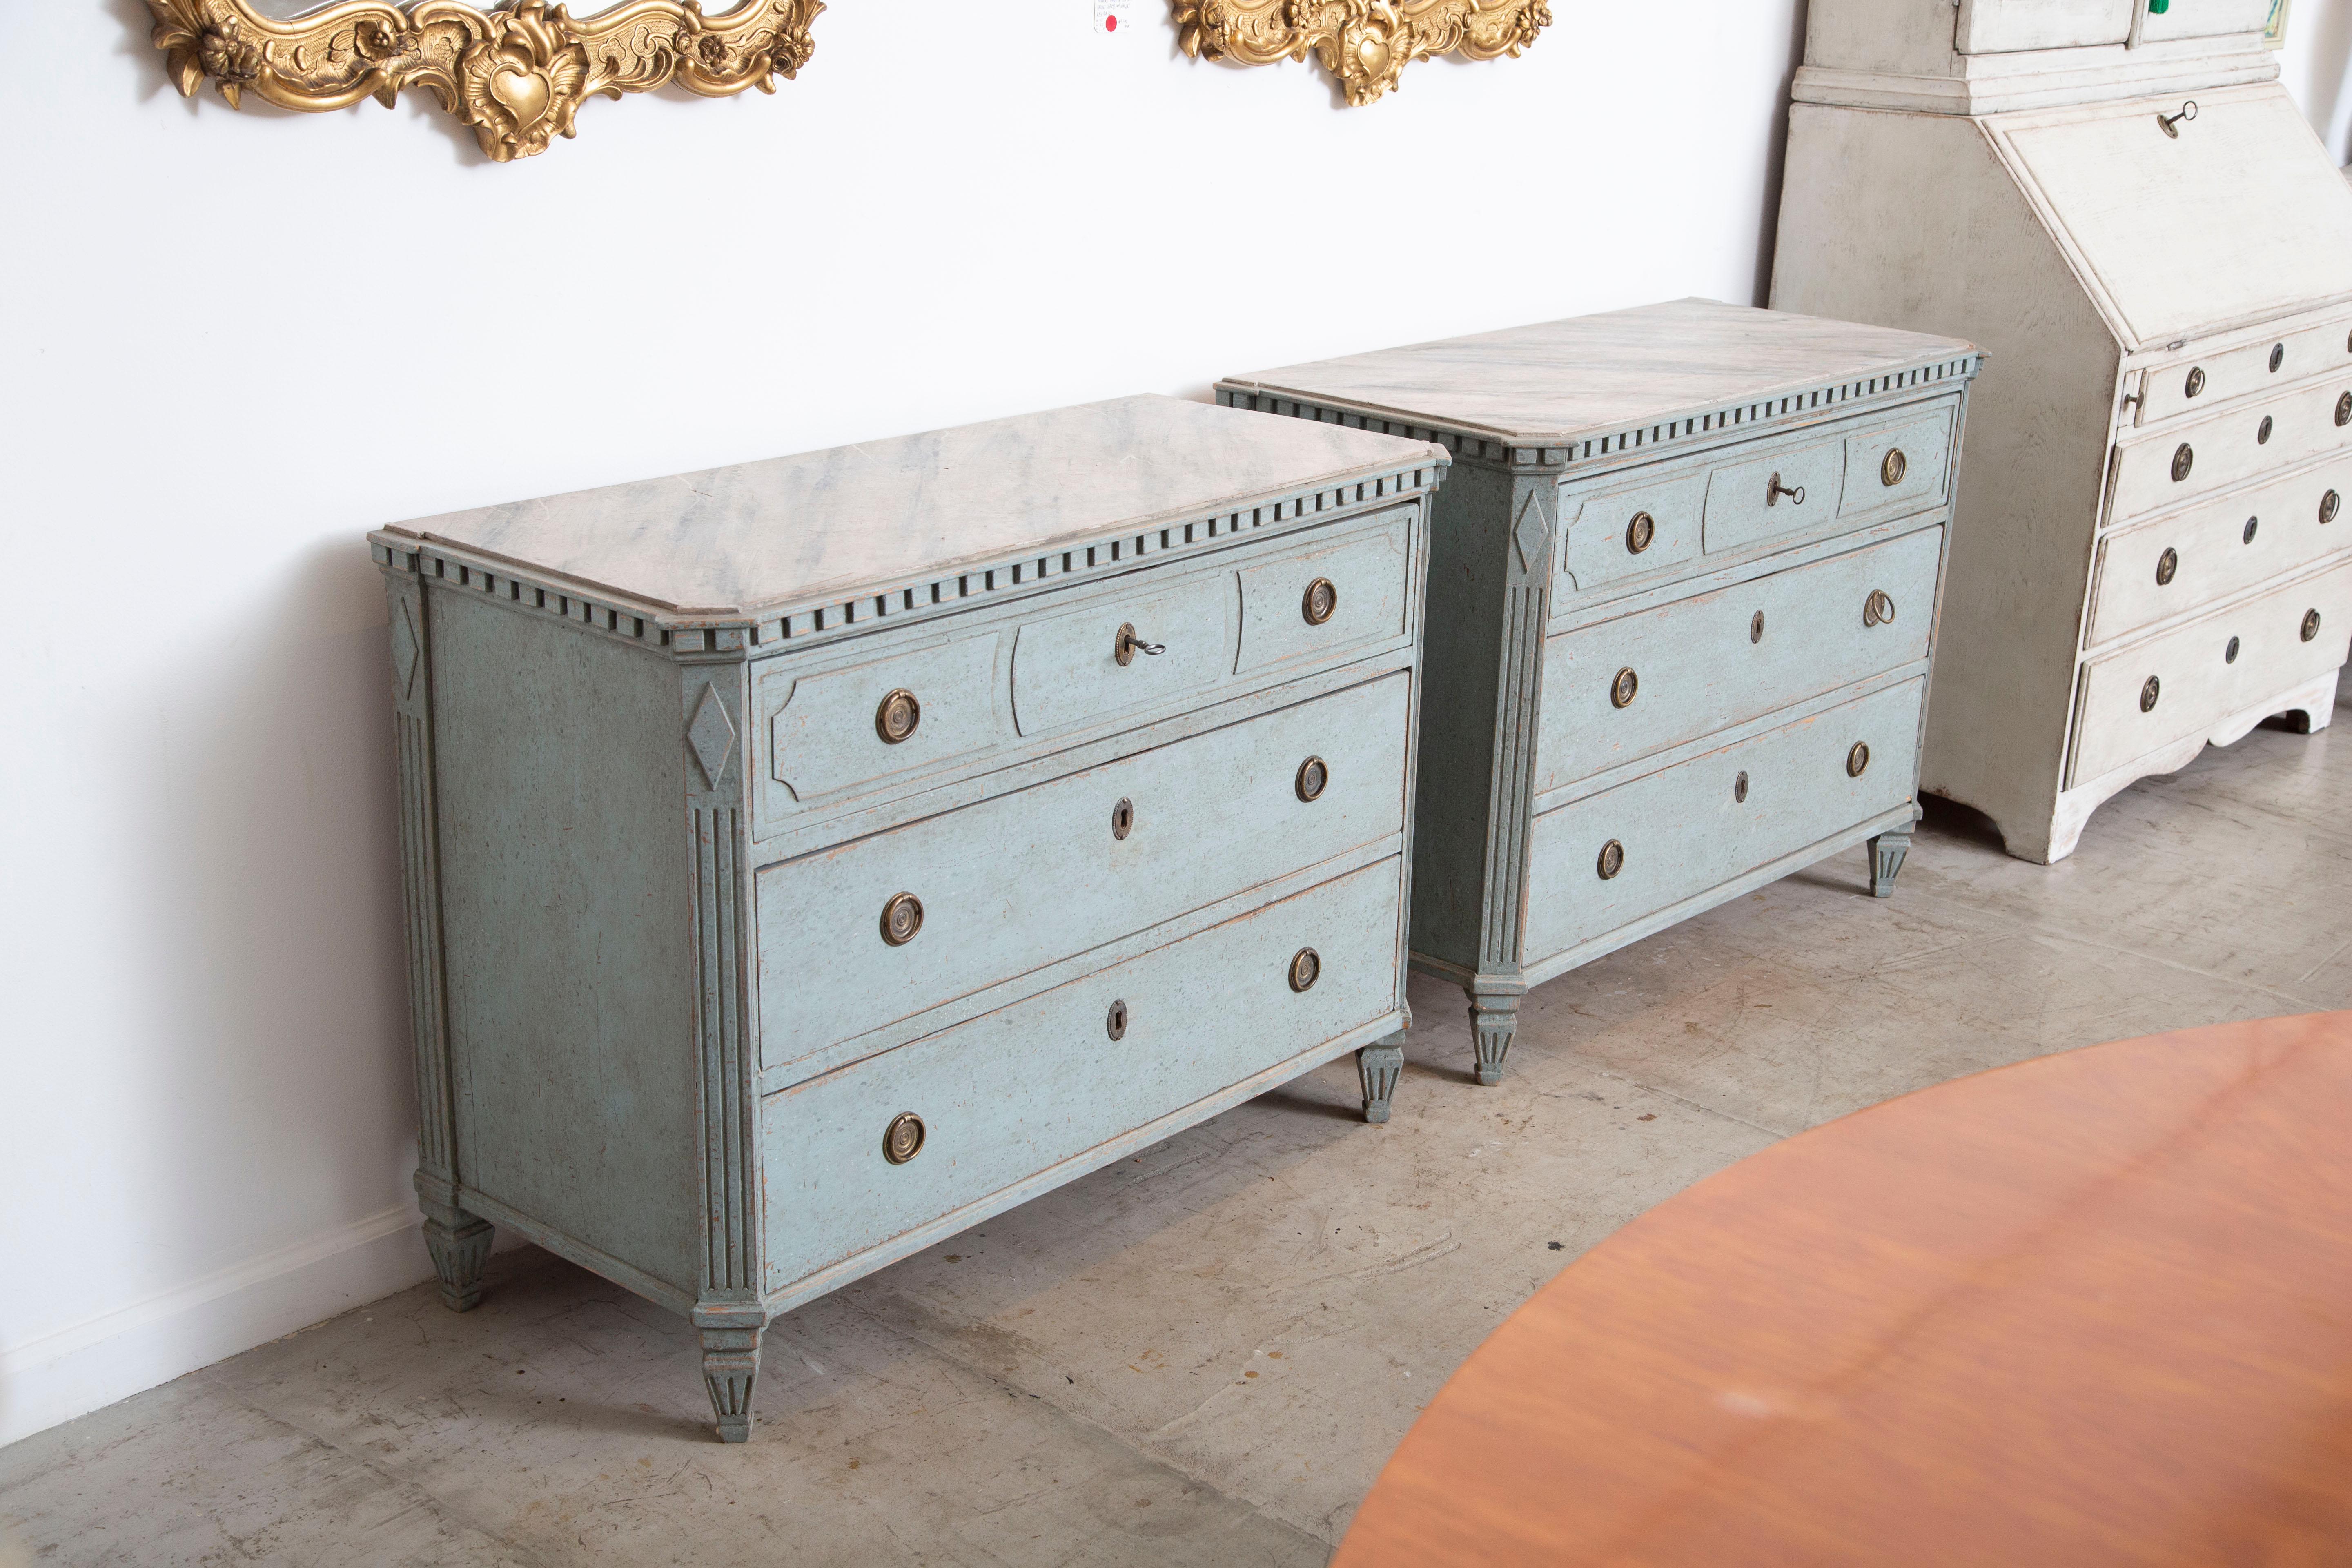 Pair Antique Swedish Gustavian style blue distressed painted chests. Tops are faux painted in greyish marble and below is a nicely caved dental moulding. Cut corners with fluted details and oval carved rosettes, tapered fluted legs. Three large